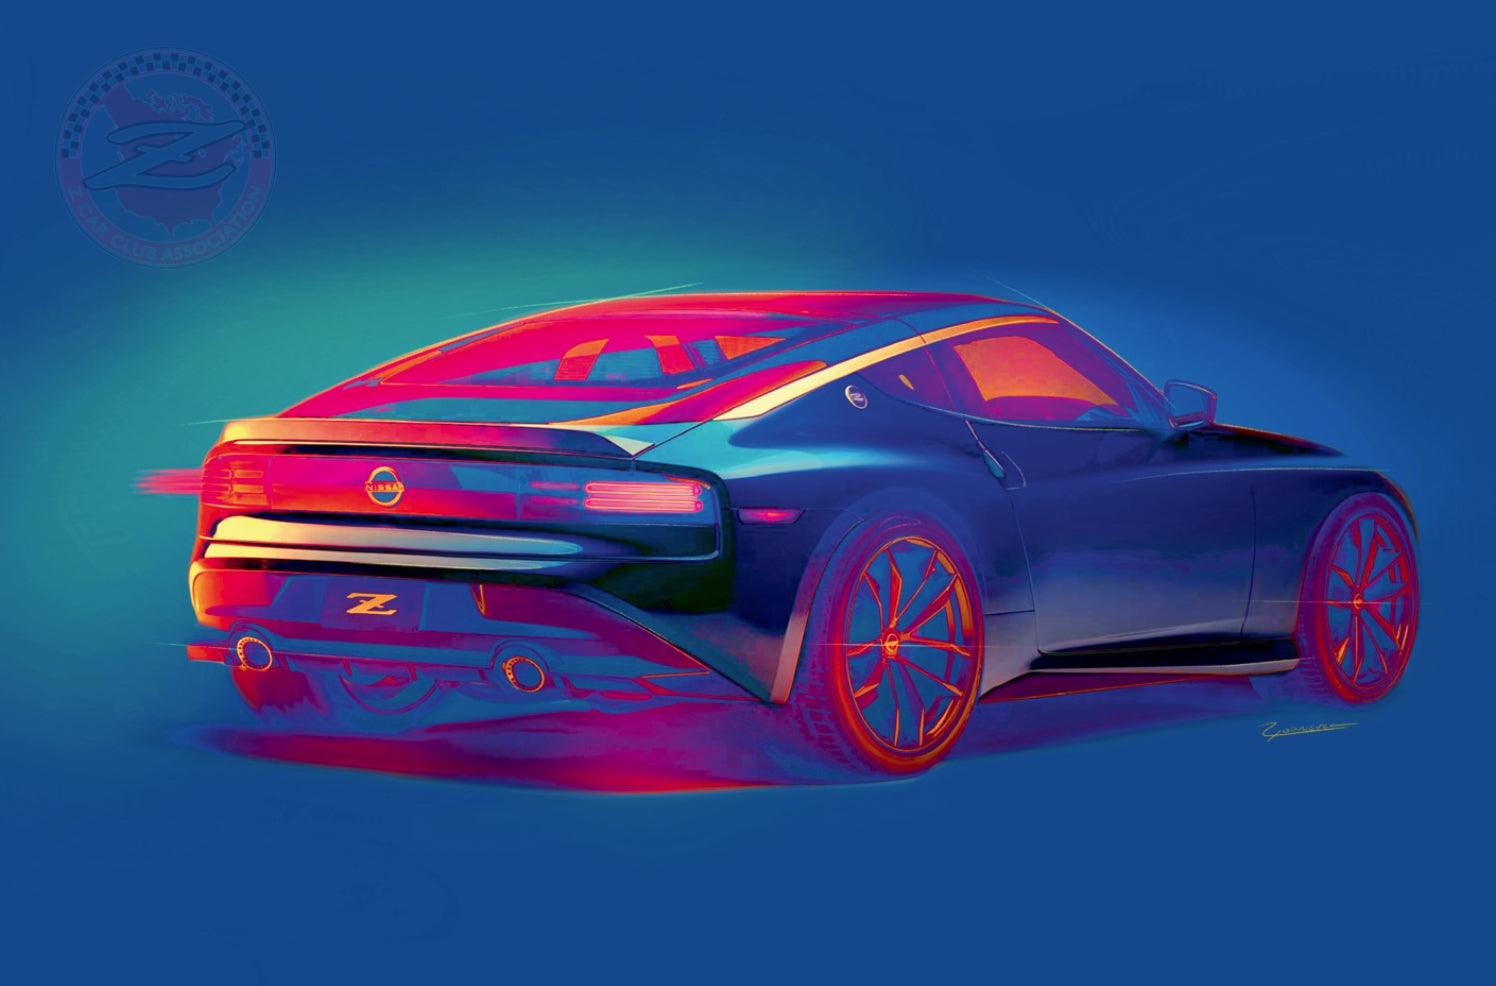 "Zychadelic" Colorful representation of the Nissan Z RZ34 in a poster - 24" x 36" Size